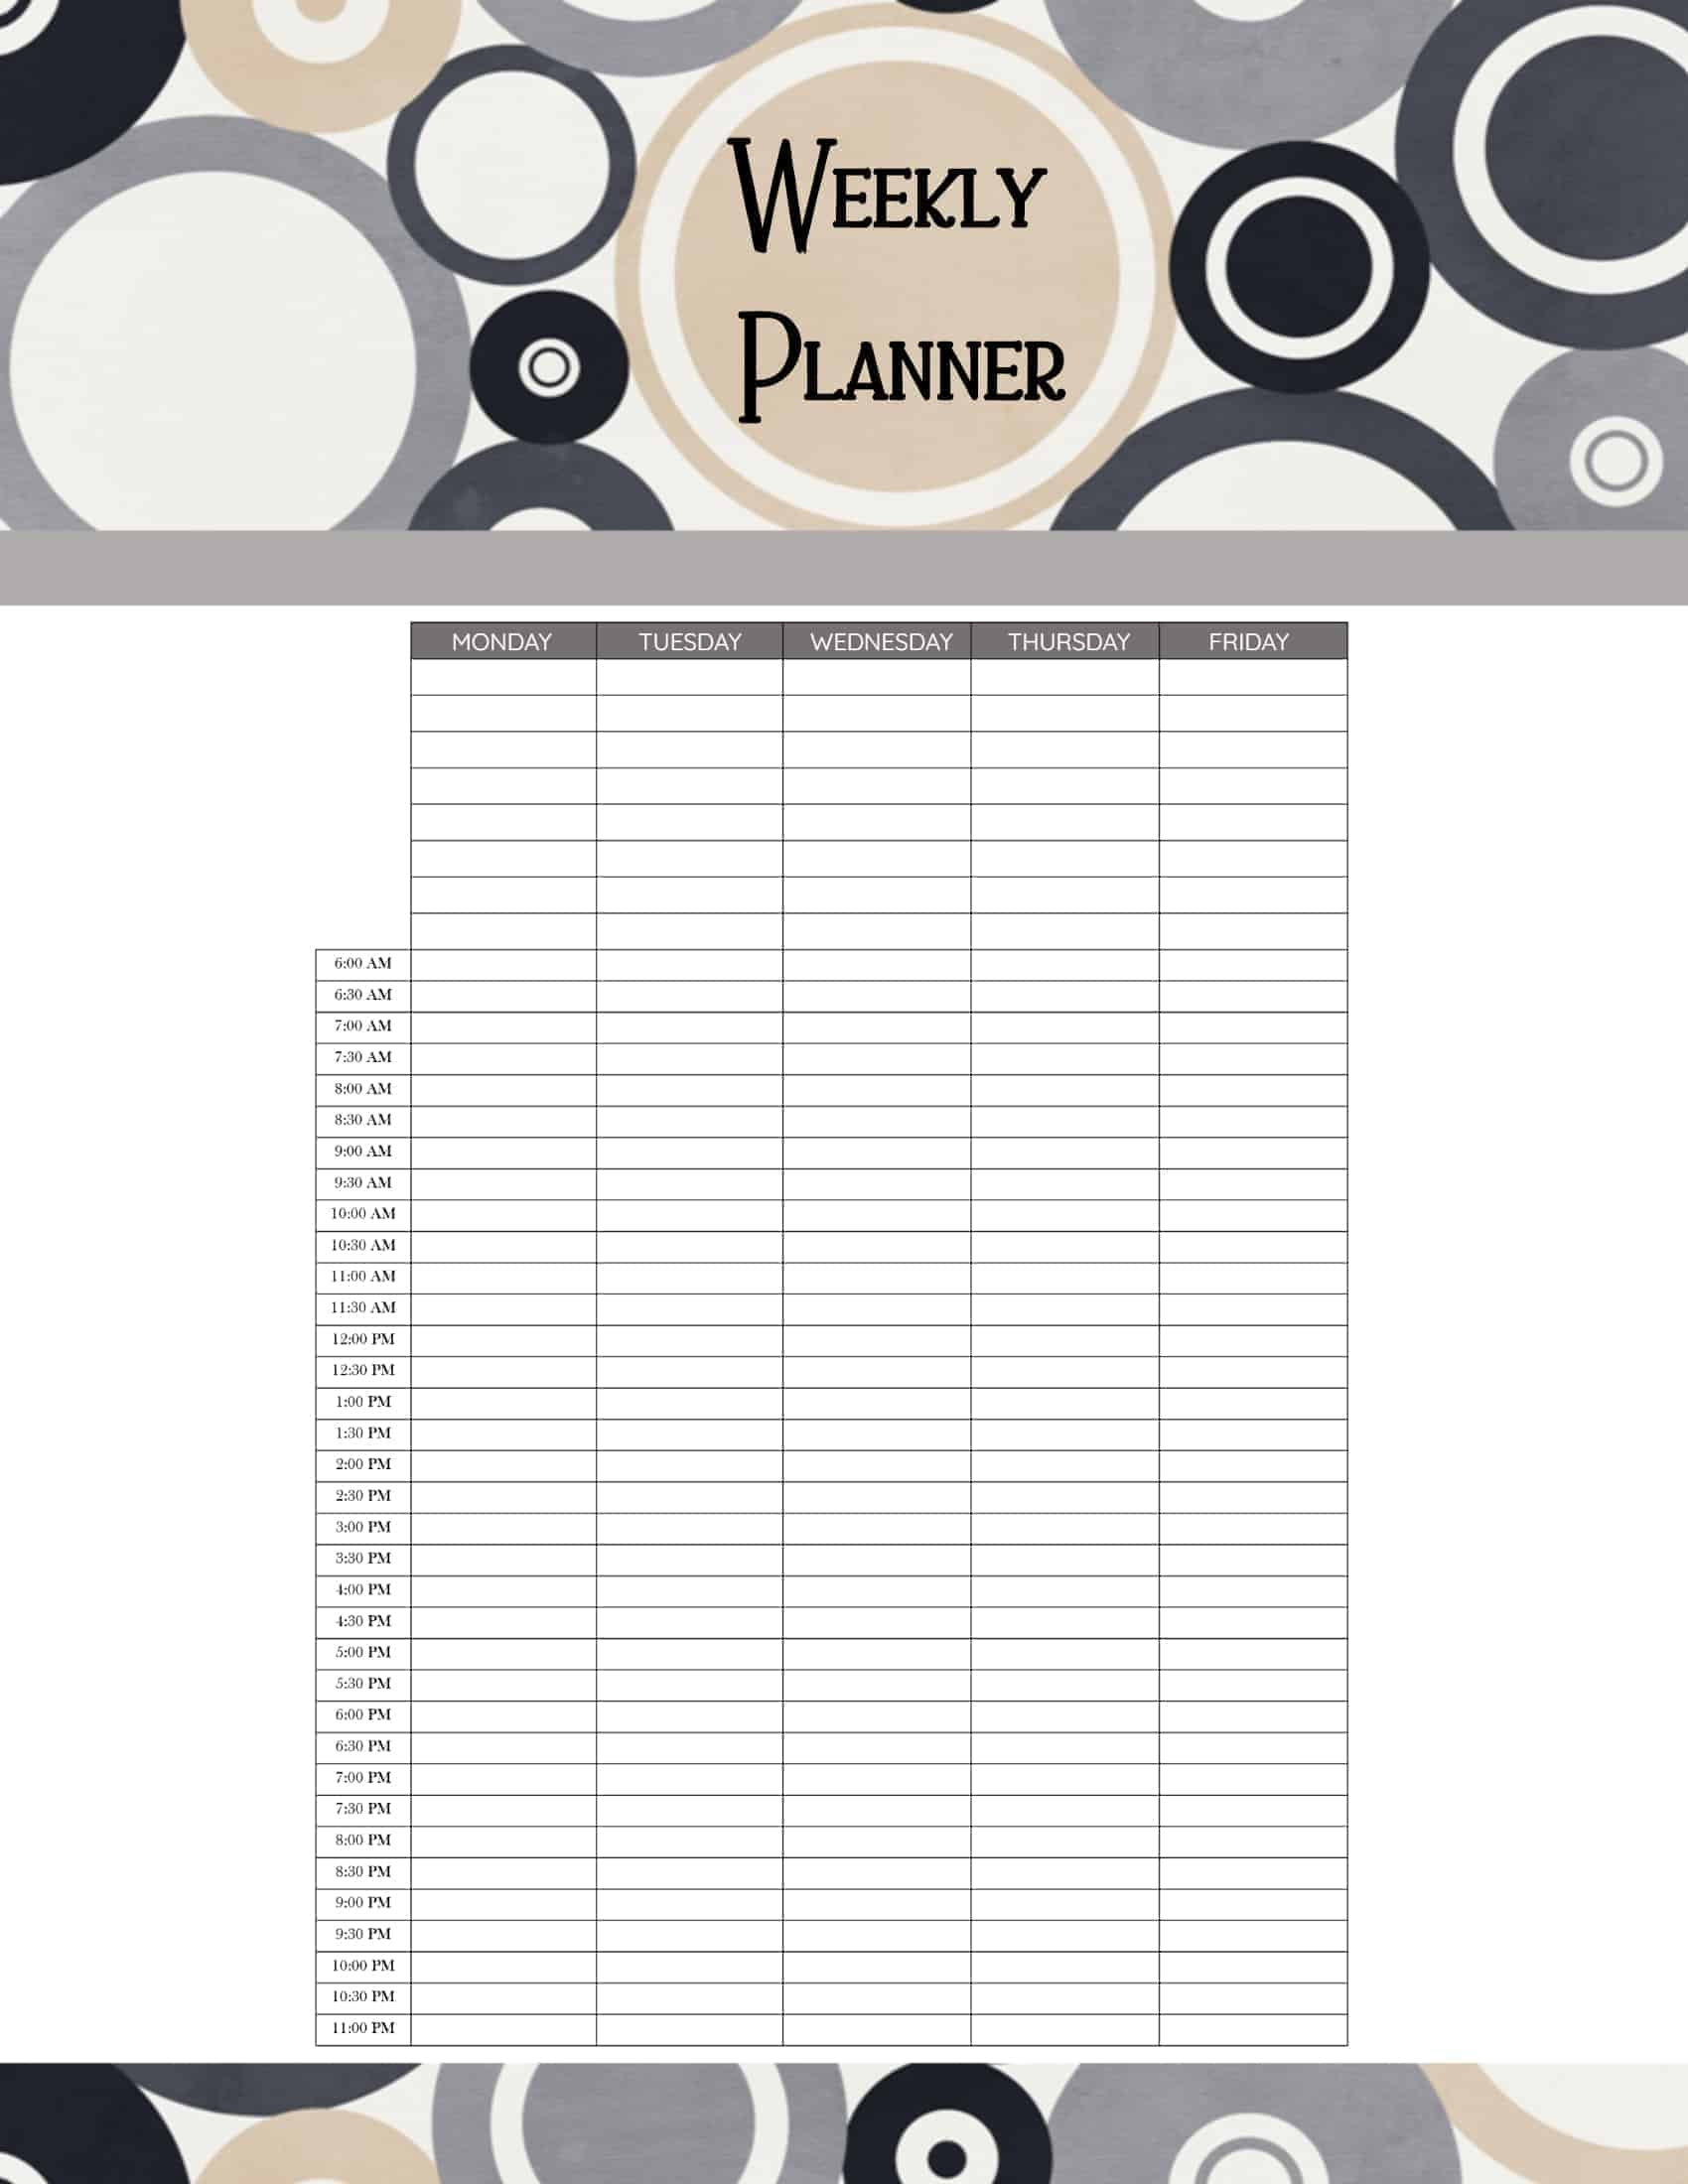 Free Printable Hourly Planner  Daily, Weekly Or Monthly within Weekly Hourly Planner Printable Pdf